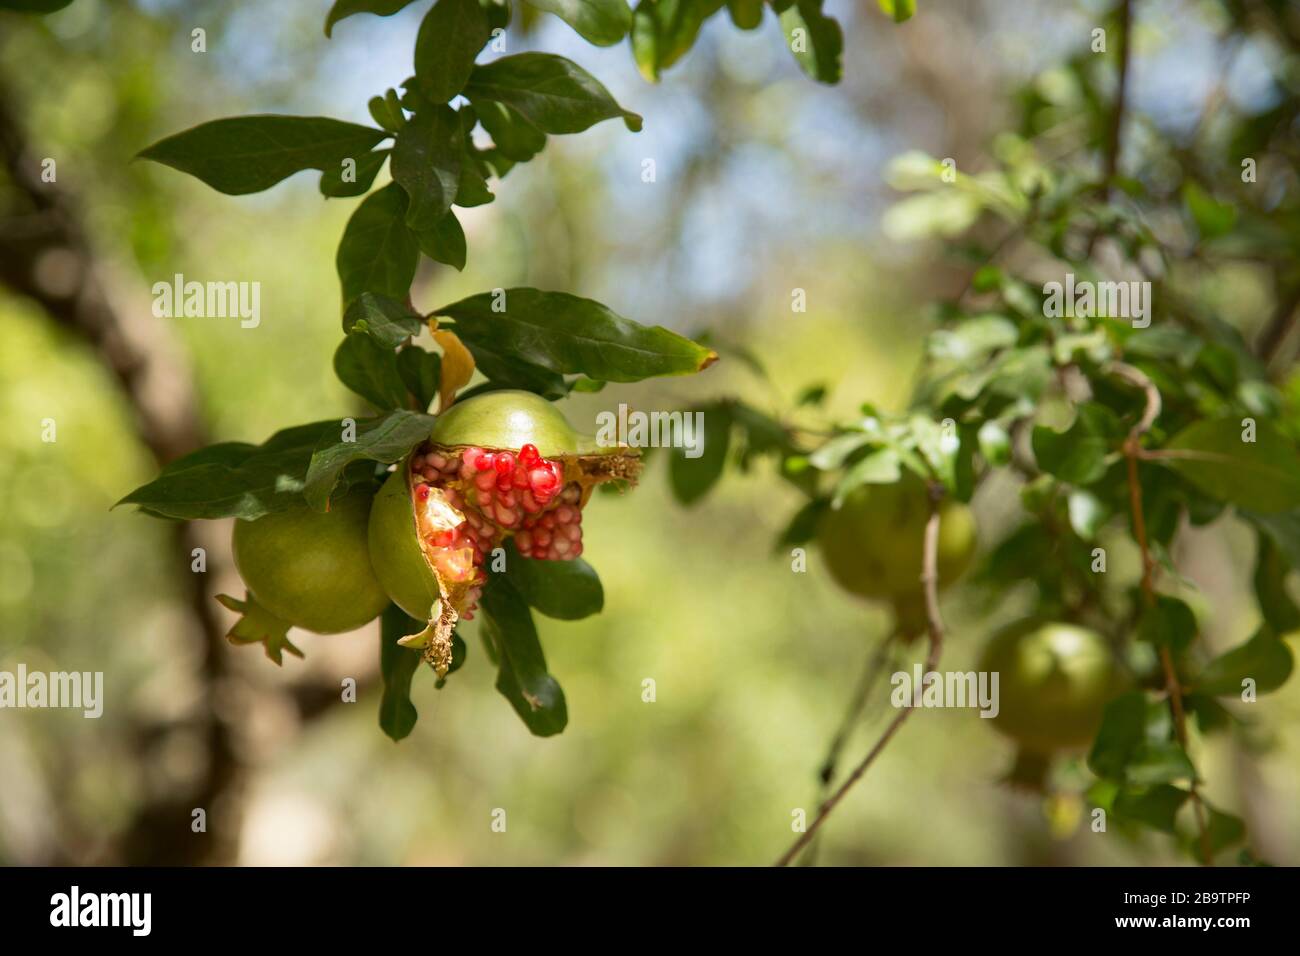 Pomegranates growing on a tree, one split open showing seeds inside, Jerez, Andalusia, Spain Stock Photo